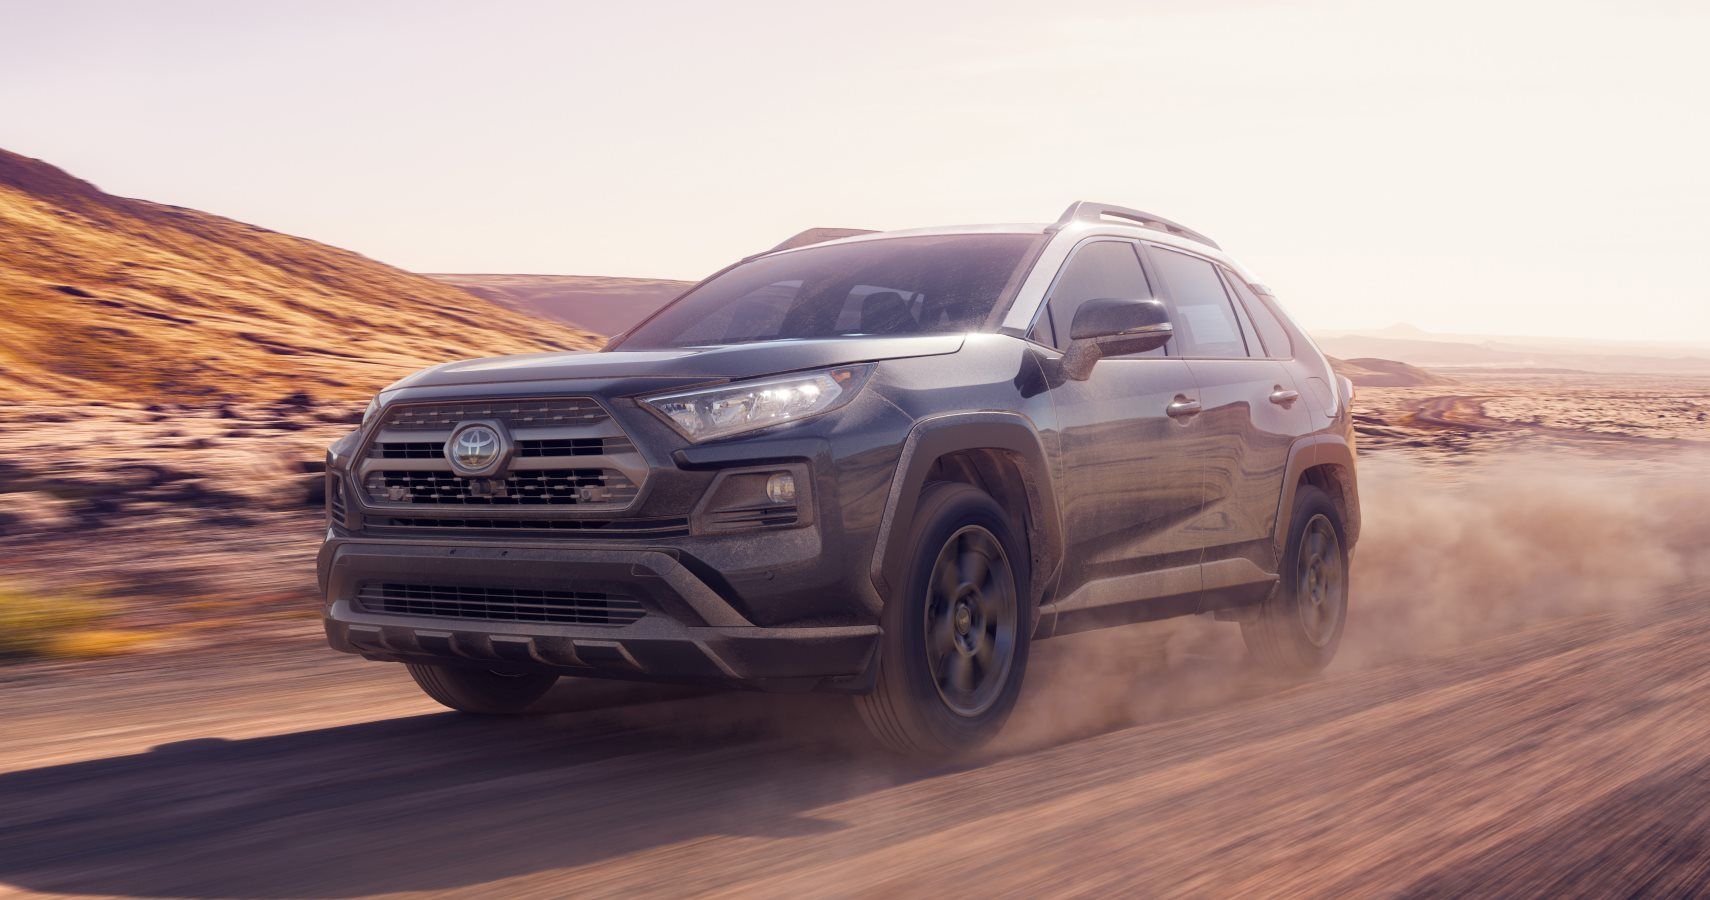 2020 Toyota RAV4 Ready For Off-Road Fun With TRD Upgrades